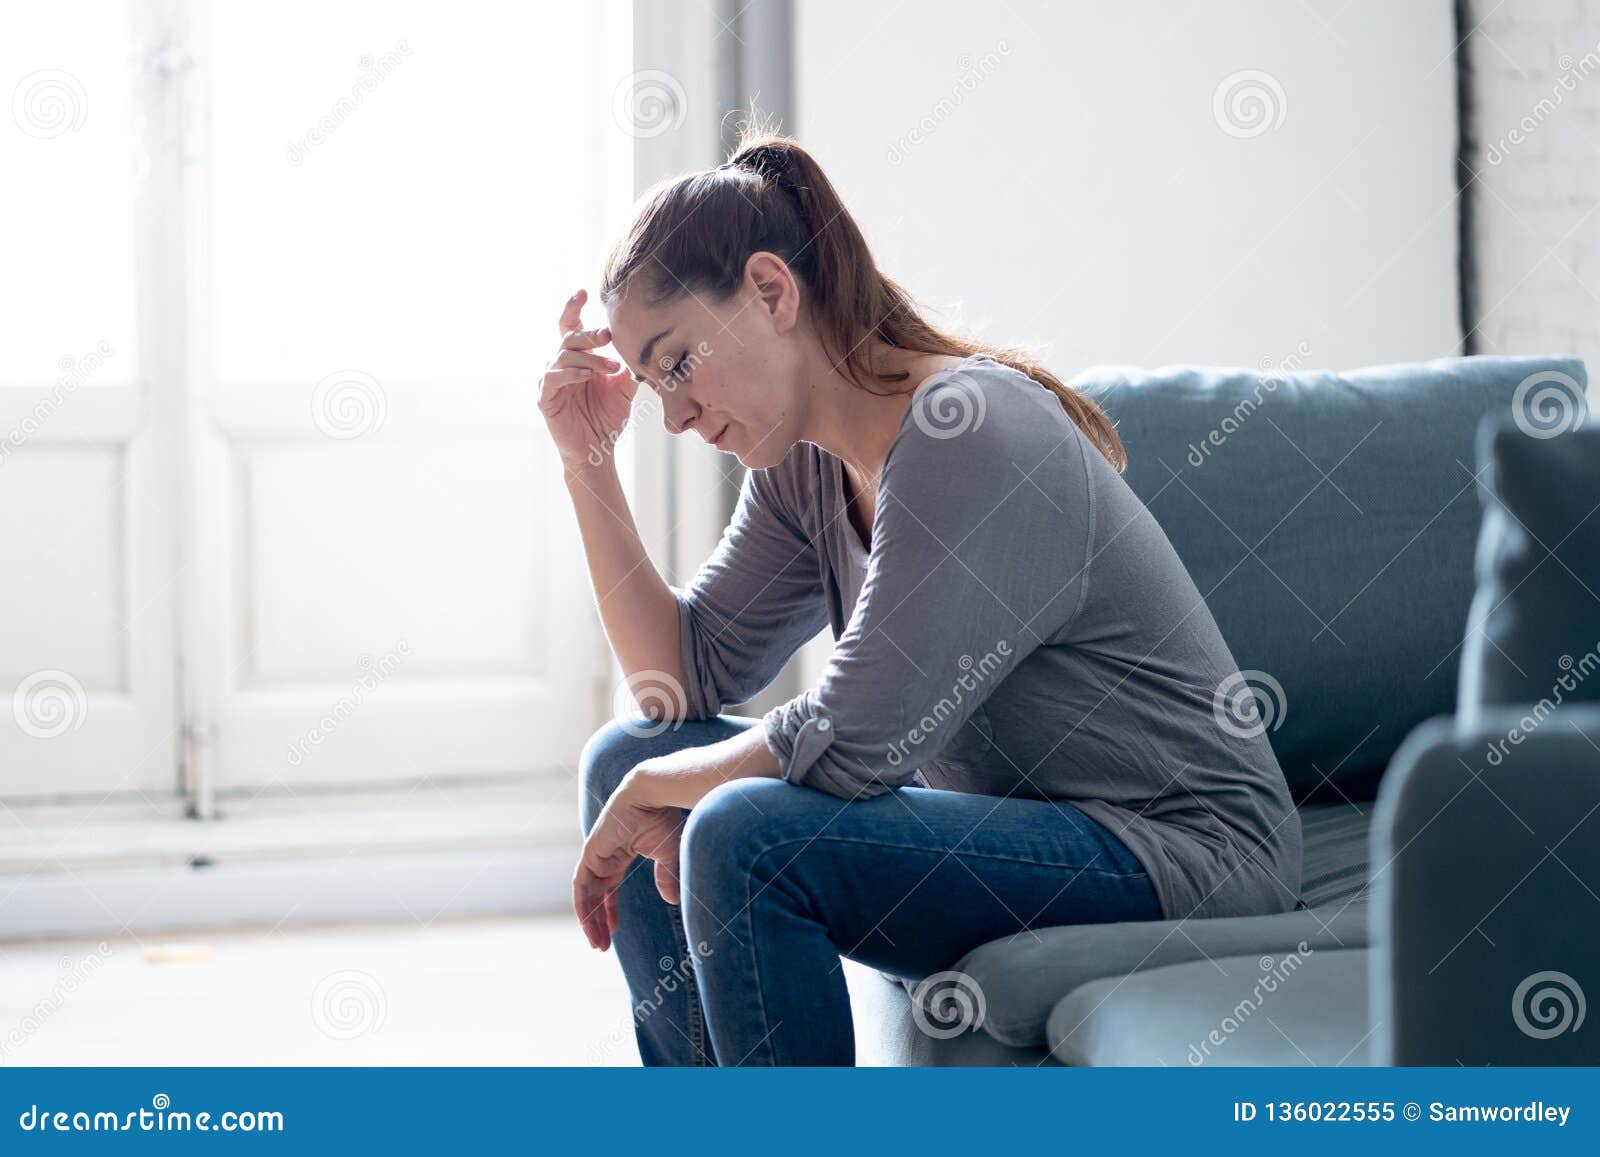 young woman suffering from depression feeling sad and lonely on sofa at home